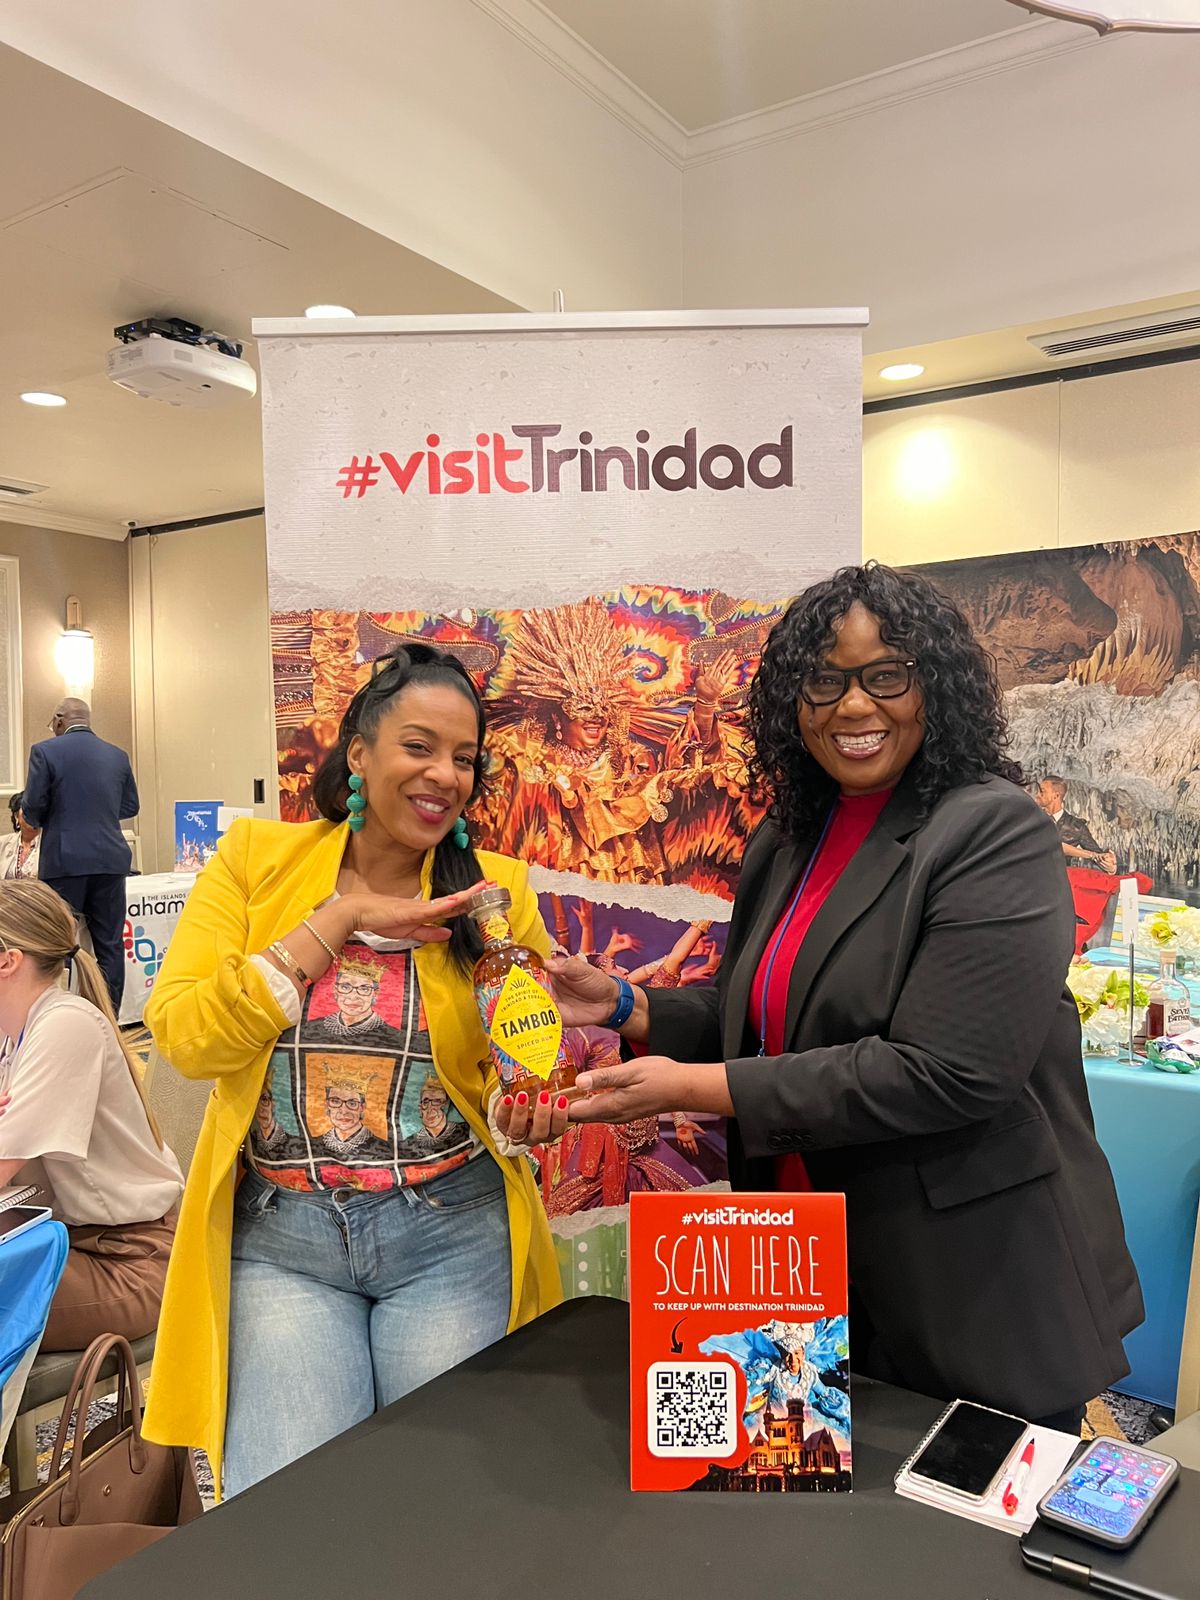 Tourism Trinidad Limited Explores New Opportunities at the Tourism Industry Marketing Conference during Caribbean Week in New York City